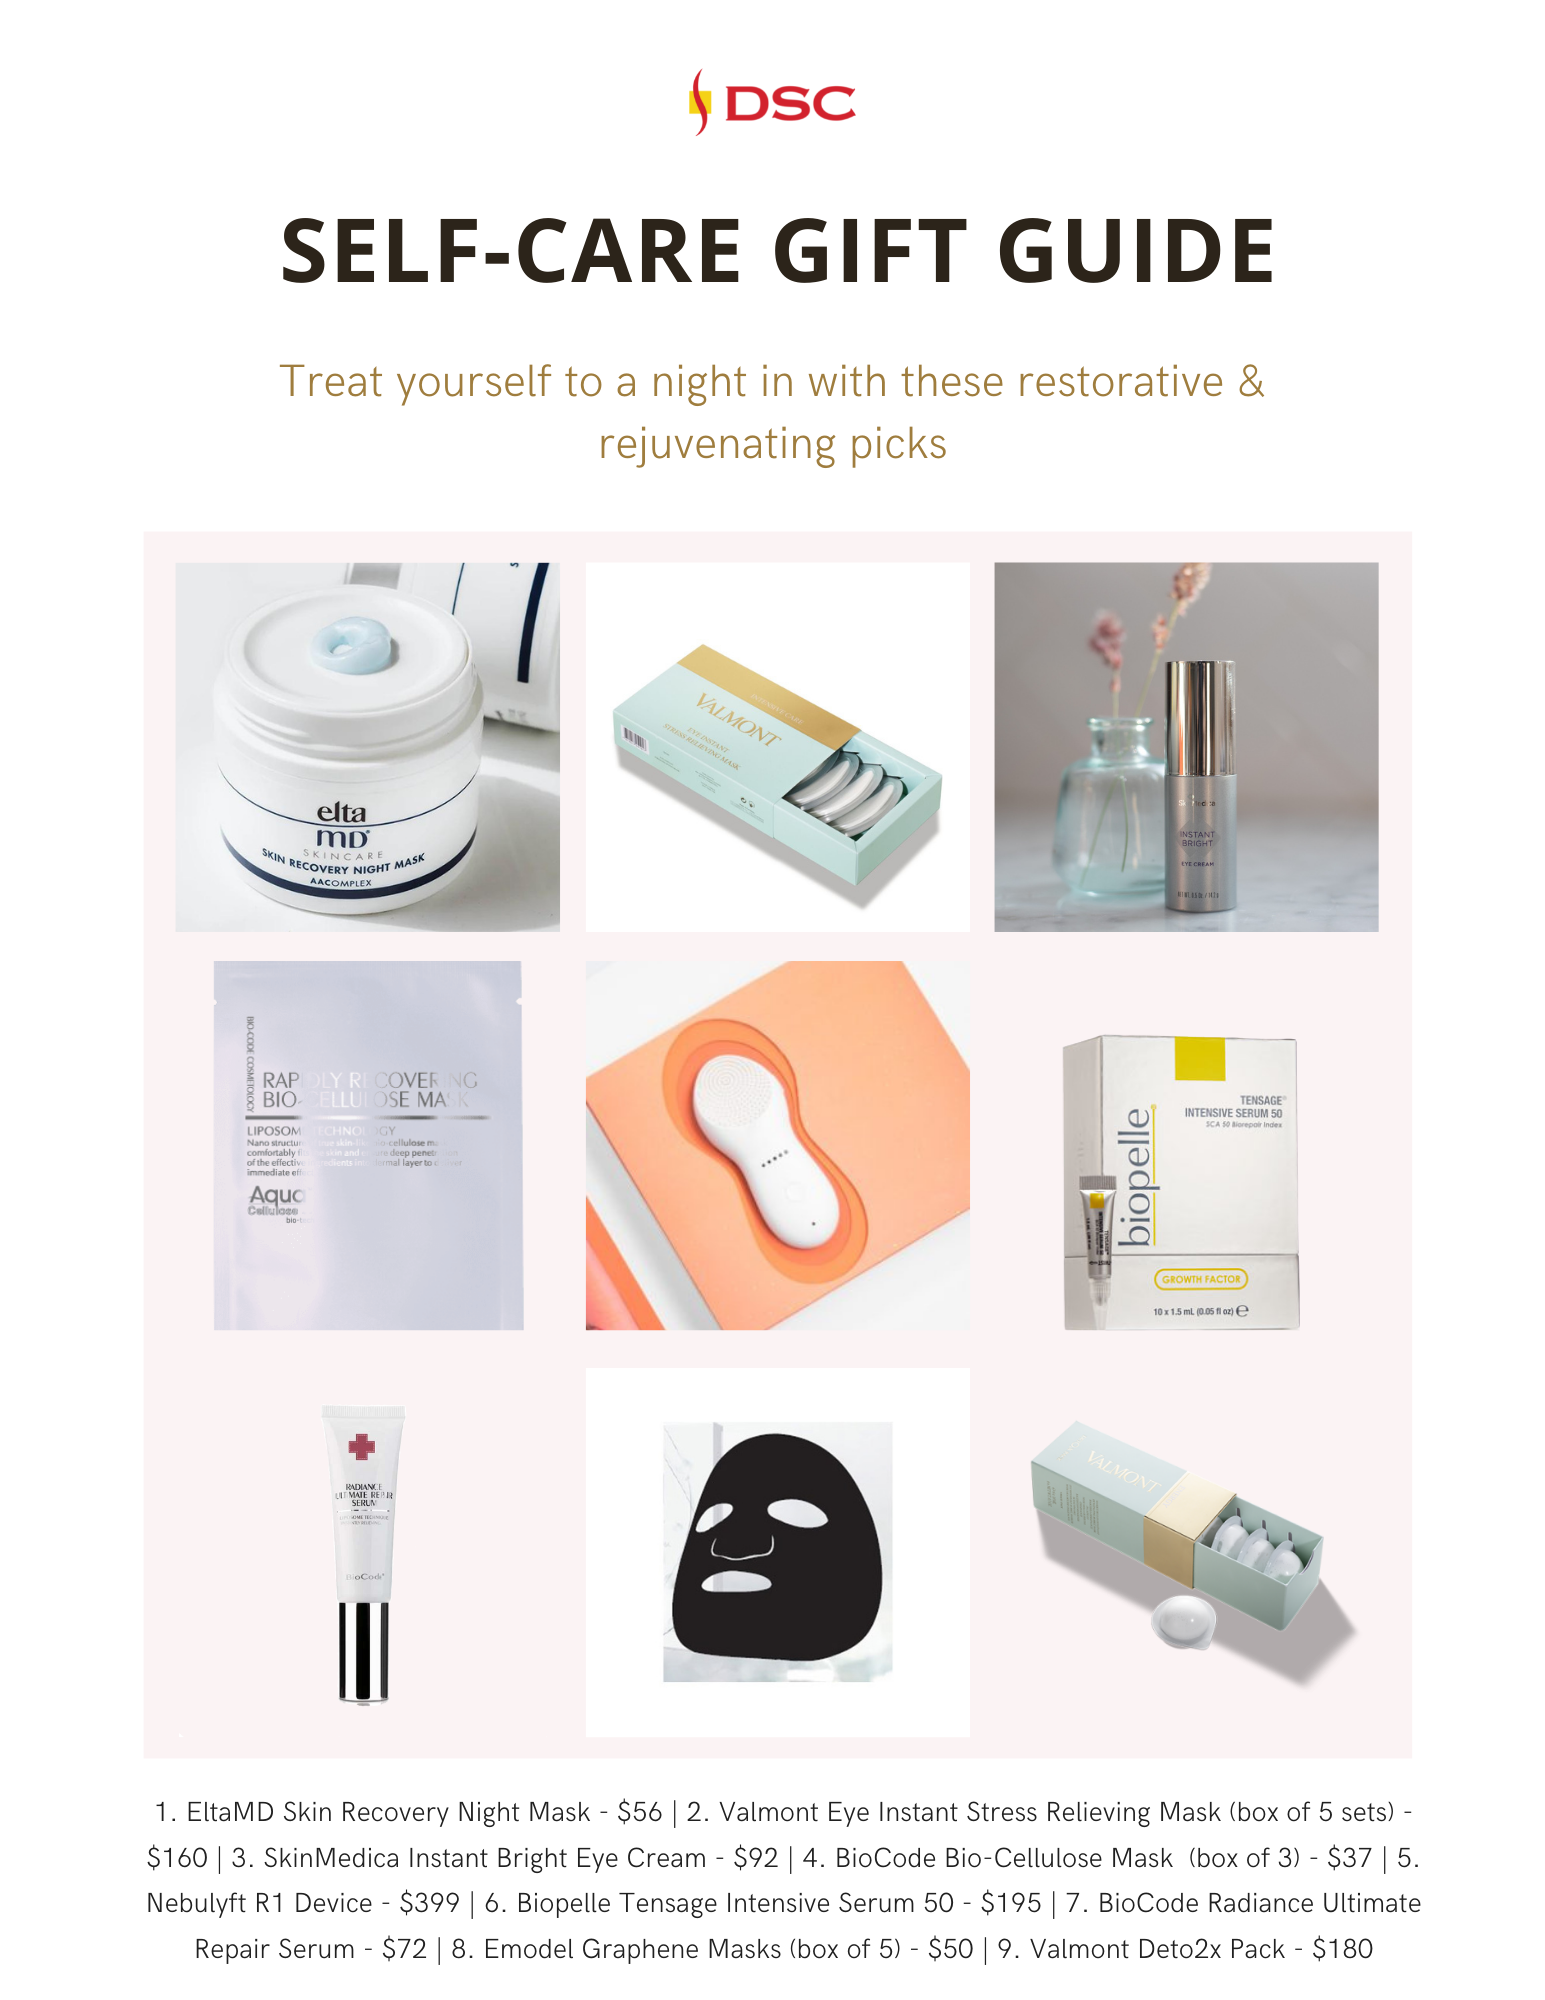 DSC 2022 holiday gift guide graphic of 9 skincare products for self-care featuring a 3x3 grid of products with the text "treat yourself to a night in with these restorative & rejuvenating picks" and the text "1. EltaMD Skin Recovery Night Mask - $56 | 2. Valmont Eye Instant Stress Relieving Mask (box of 5 sets) - $160 | 3. SkinMedica Instant Bright Eye Cream - $92 | 4. BioCode Bio-Cellulose Mask (box of 3) - $37 | 5. Nebulyft R1 Device - $399 | 6. Biopelle Tensage Intensive Serum 50 - $195 | 7. BioCode Radiance Ultimate Repair Serum - $72 | 8. Emodel Graphene Masks (box of 5) - $50 | 9. Valmont Deto2x Pack - $180" at the bottom